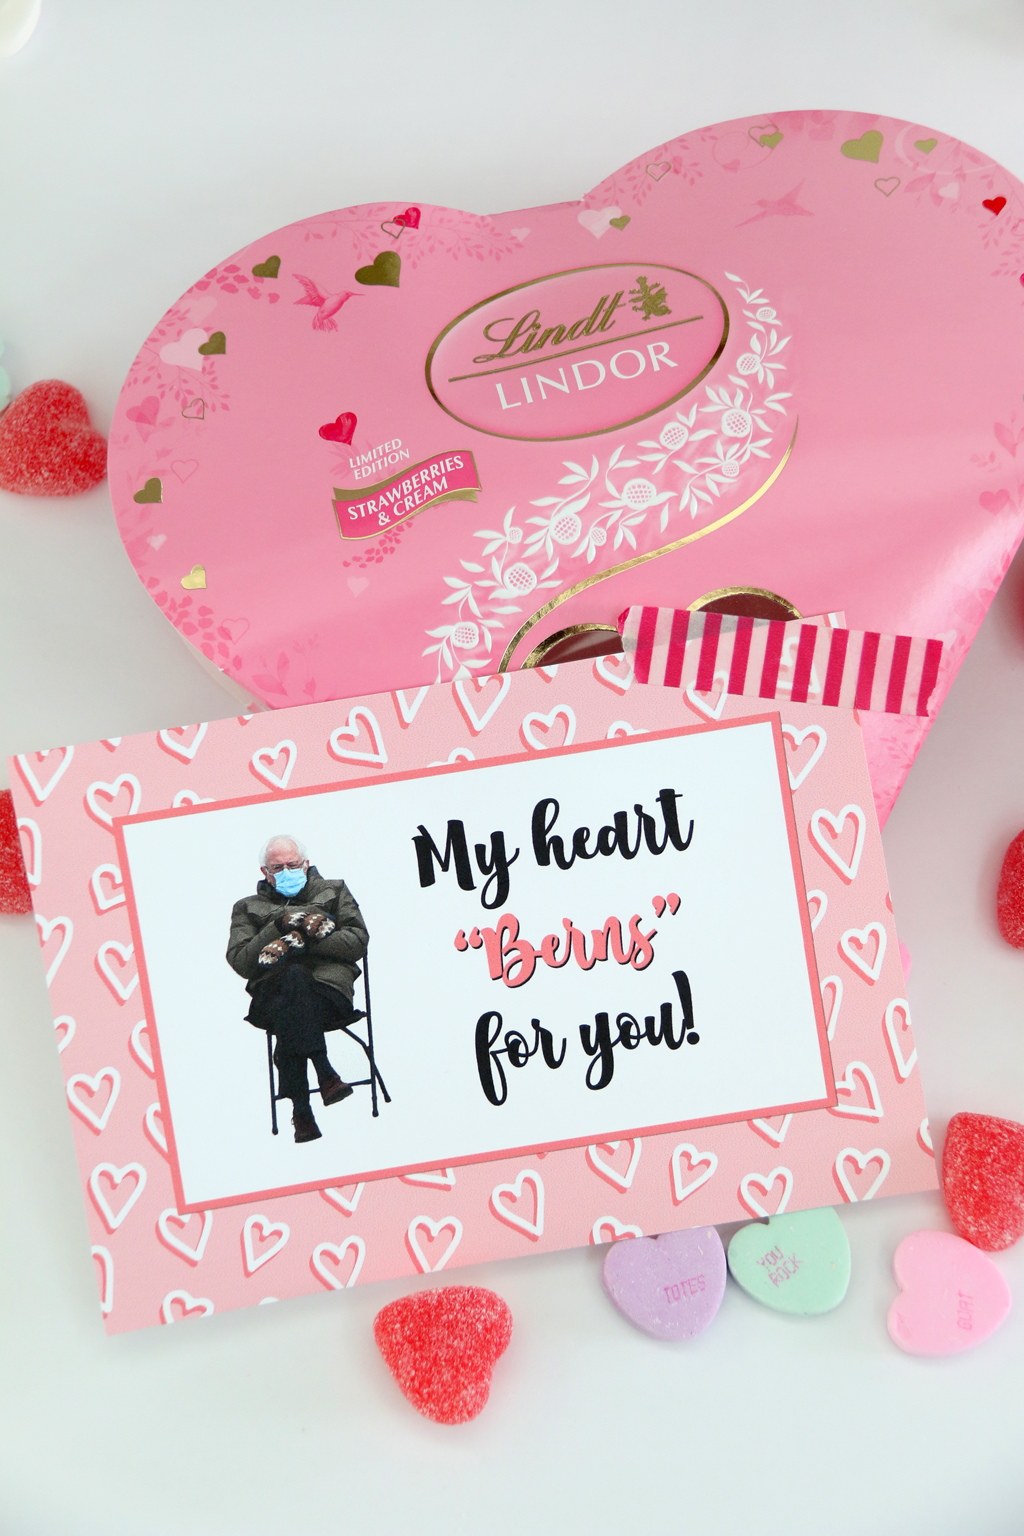 My Heart "Berns" for you Free Valentine Gift Tag taped to Lindt Lindor Chocolates